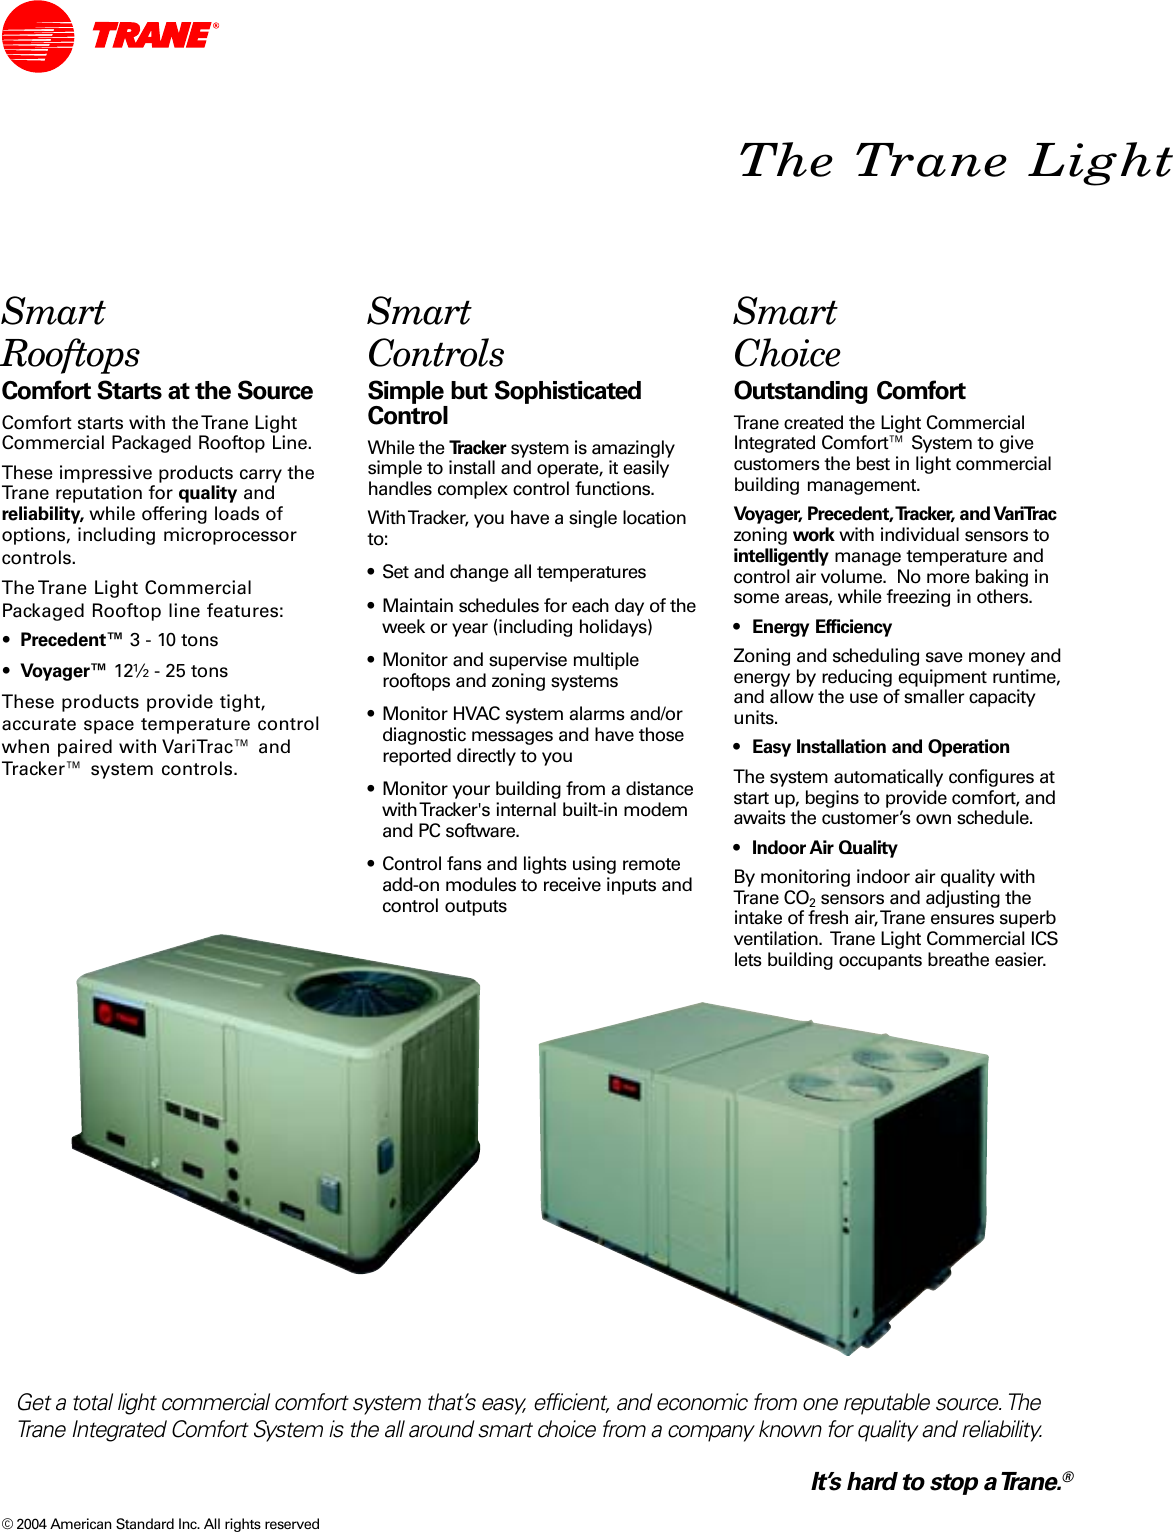 Page 2 of 6 - Trane Trane-Varitrac-Dampers-Brochure- UN-SLB002-EN 10/01/2004 Light Commercial Integrated Comfort System  Smart Rooftops , Controls Choice Trane-varitrac-dampers-brochure